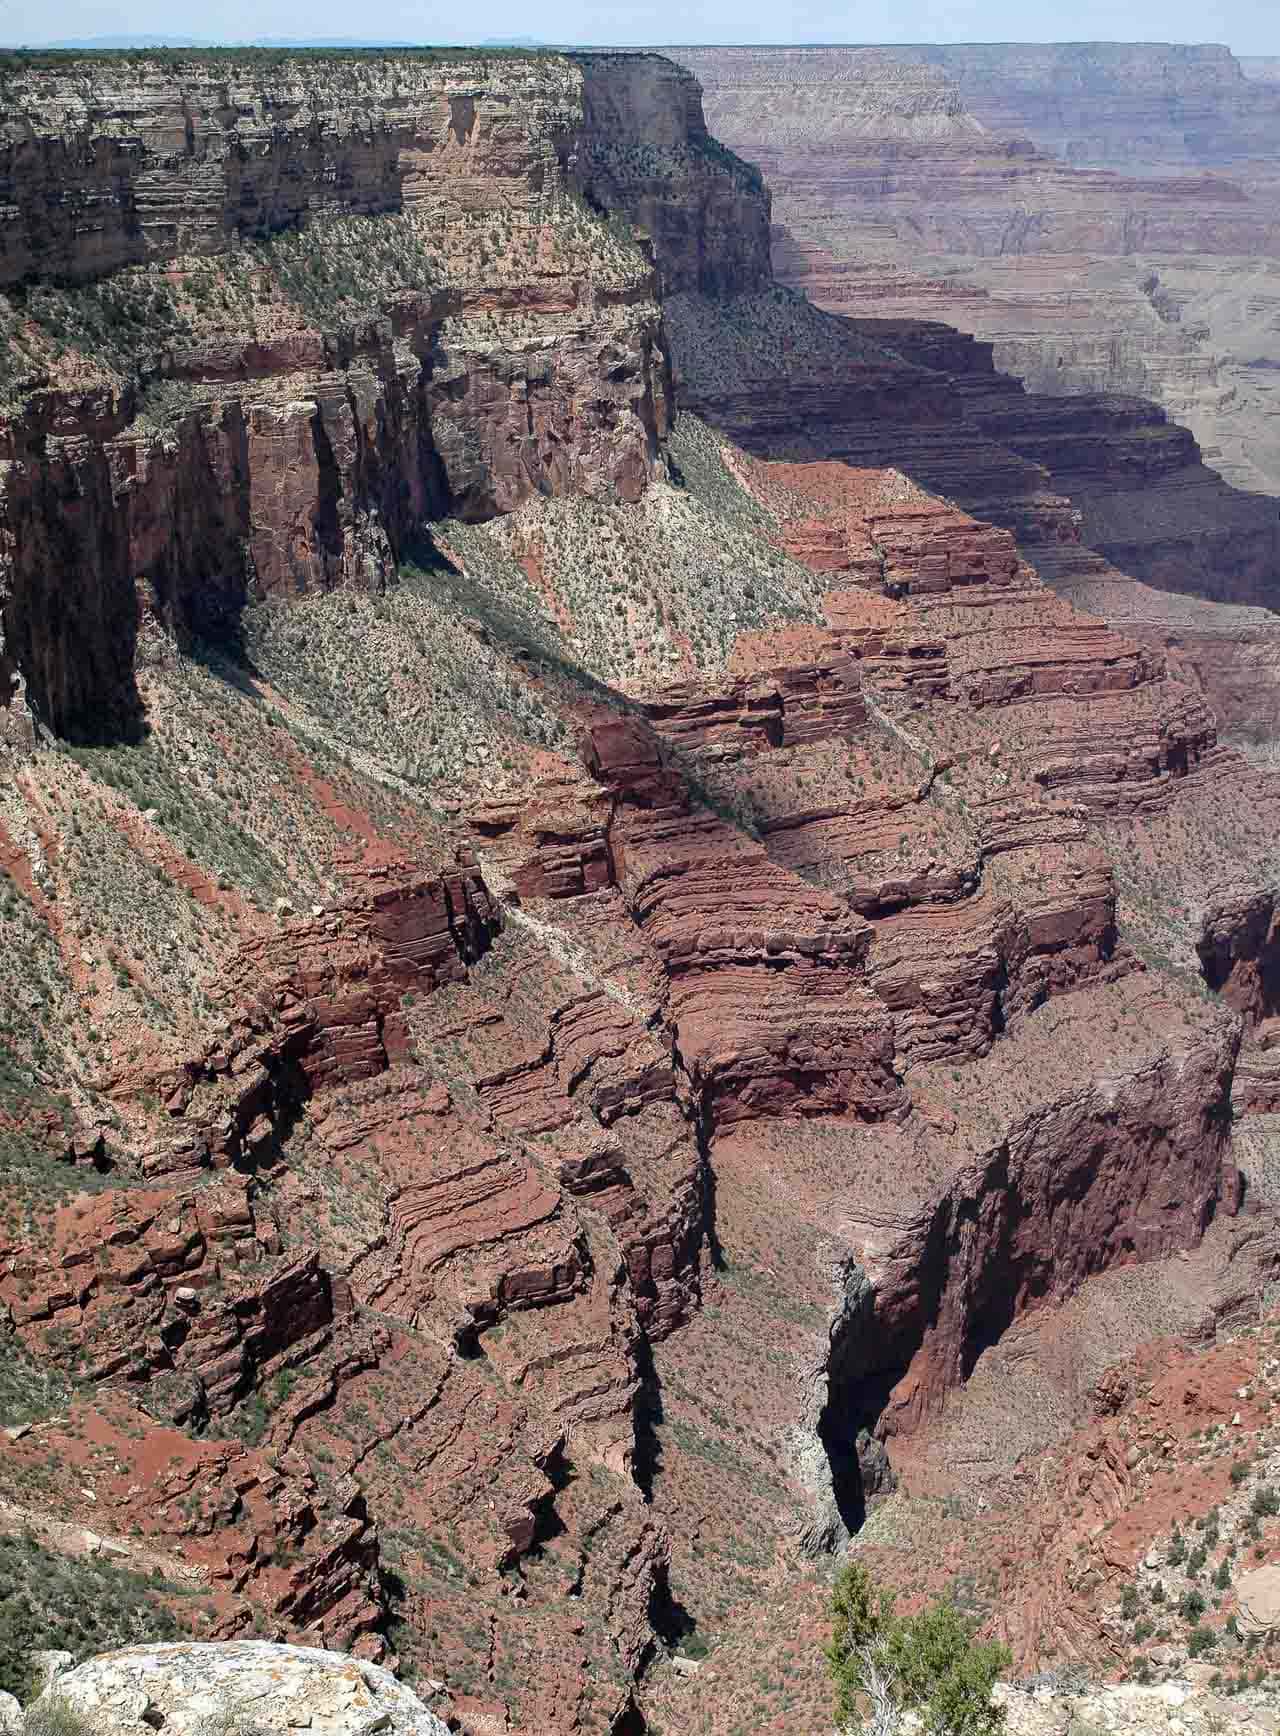 The Abyss overlook on Hermit Road in Grand Canyon National Park - Image credit NPS